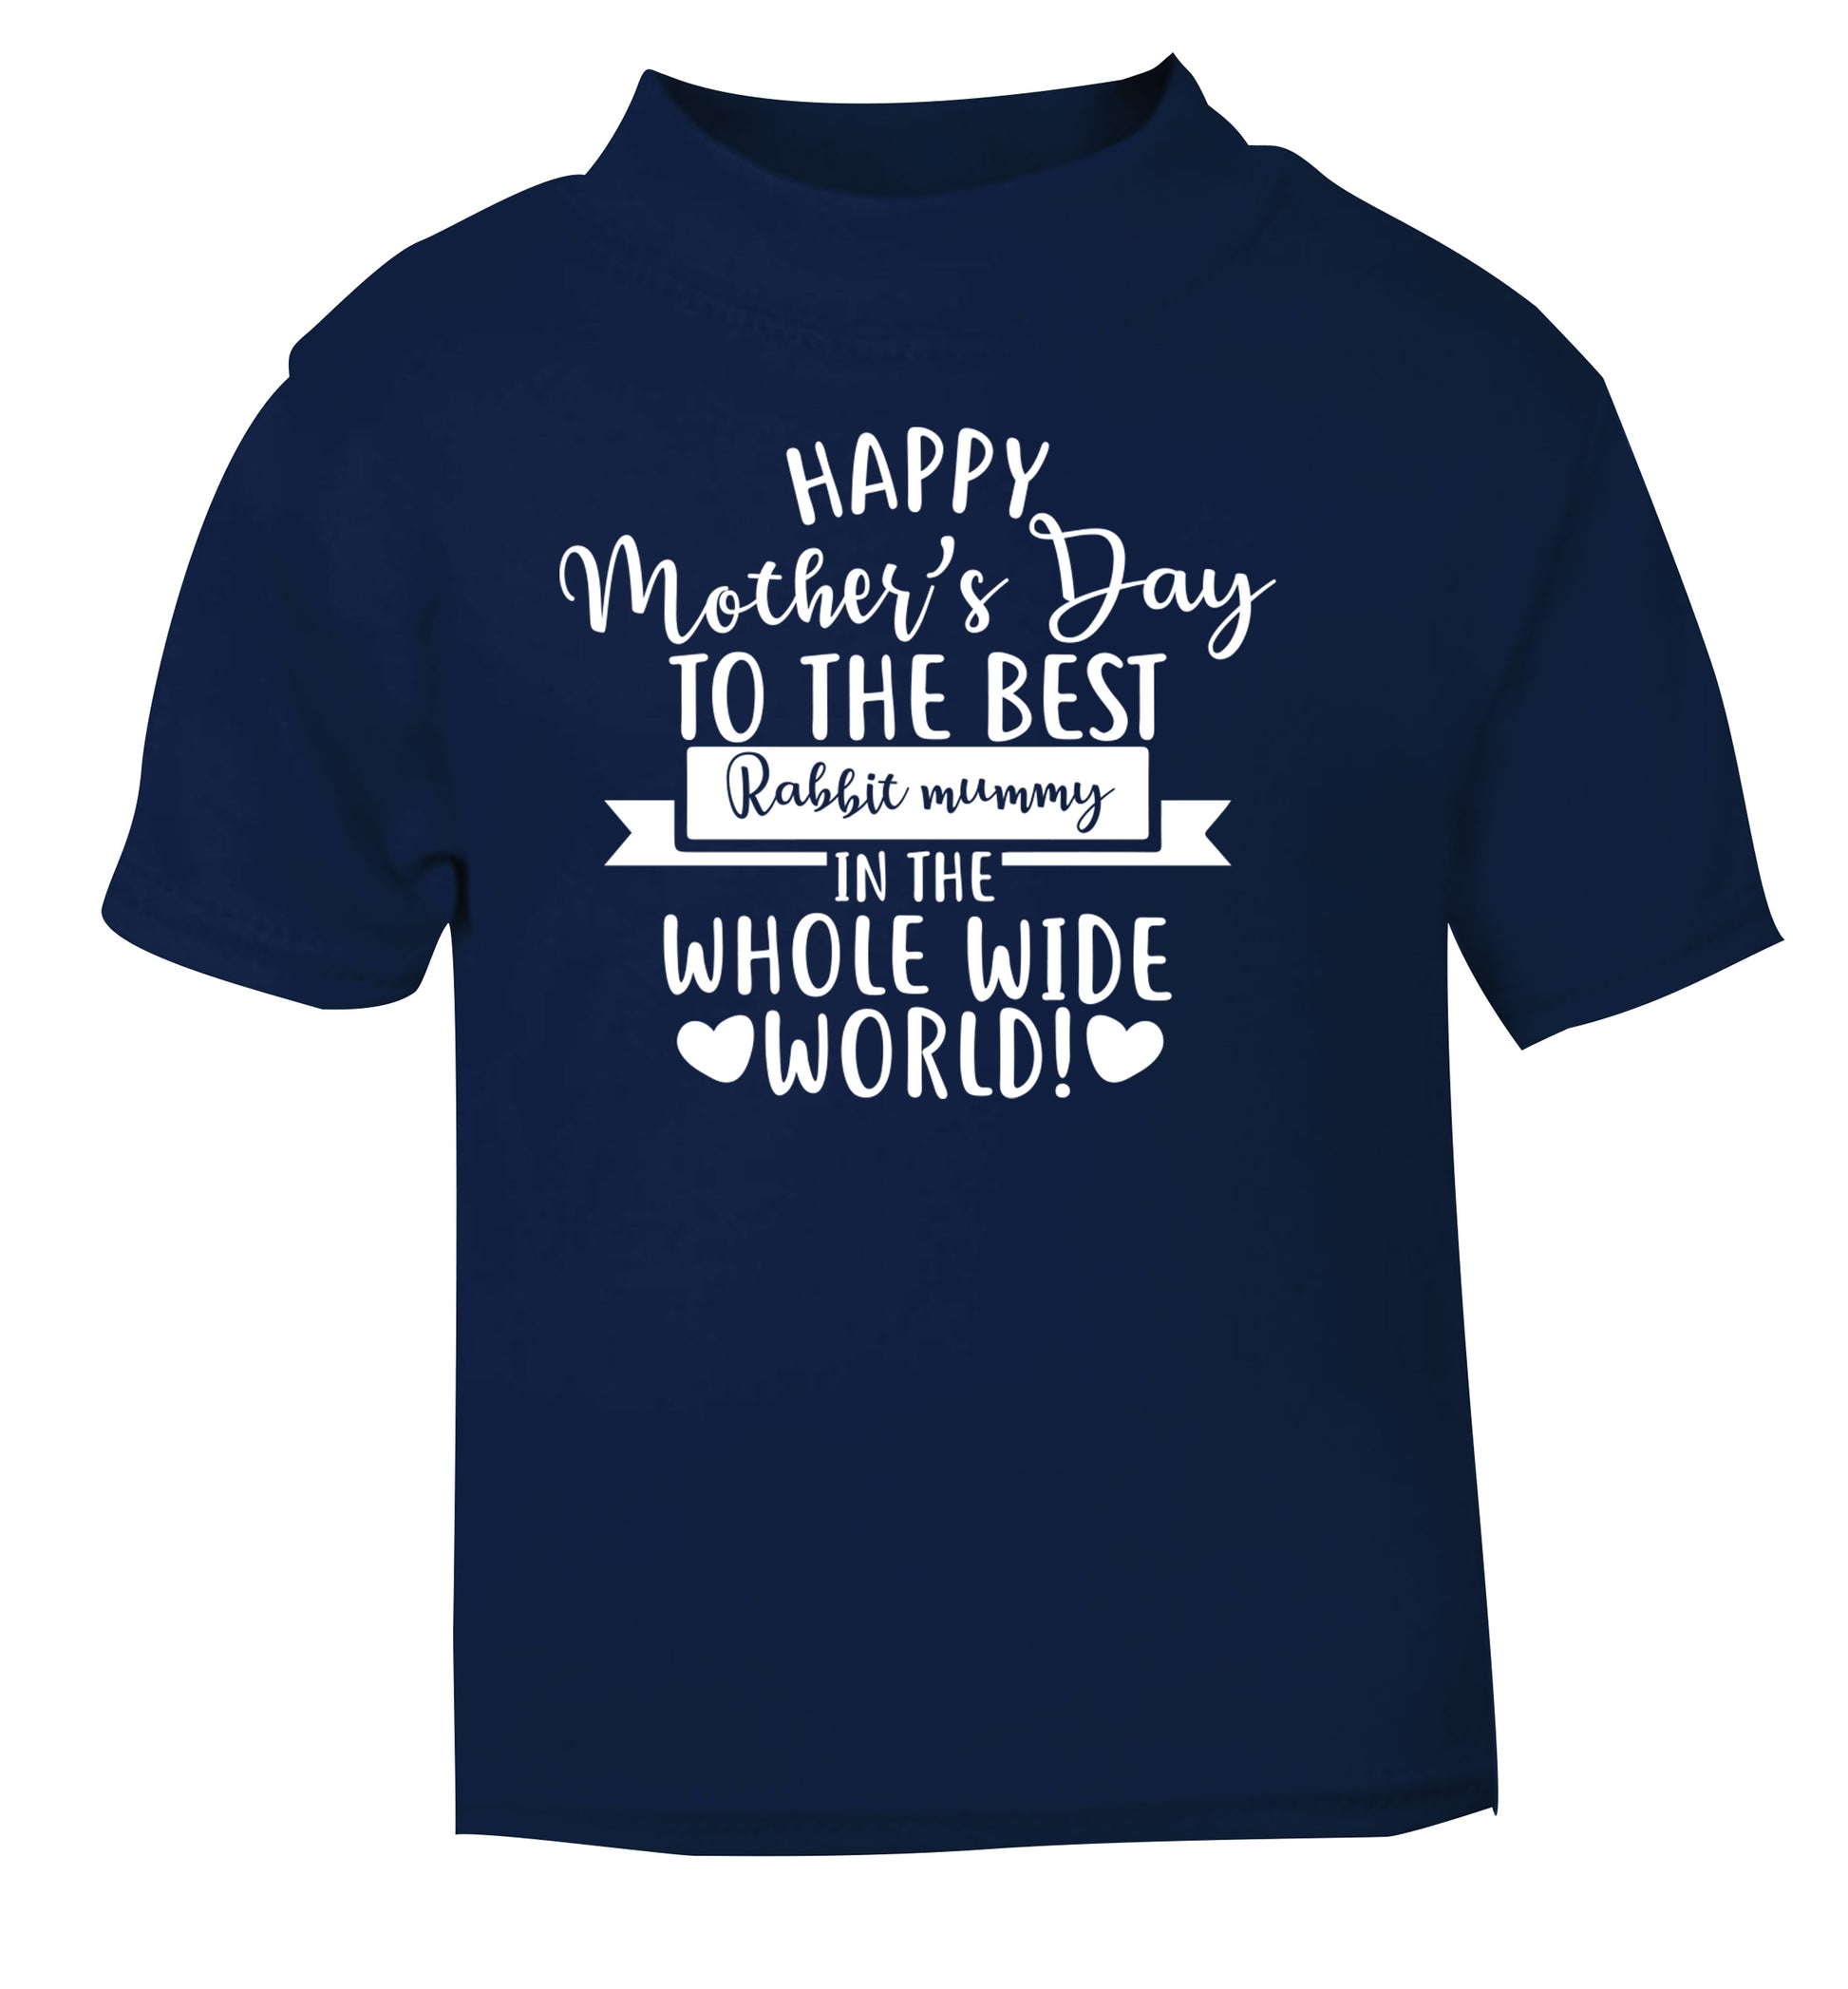 Happy mother's day to the best rabbit mummy in the world navy Baby Toddler Tshirt 2 Years